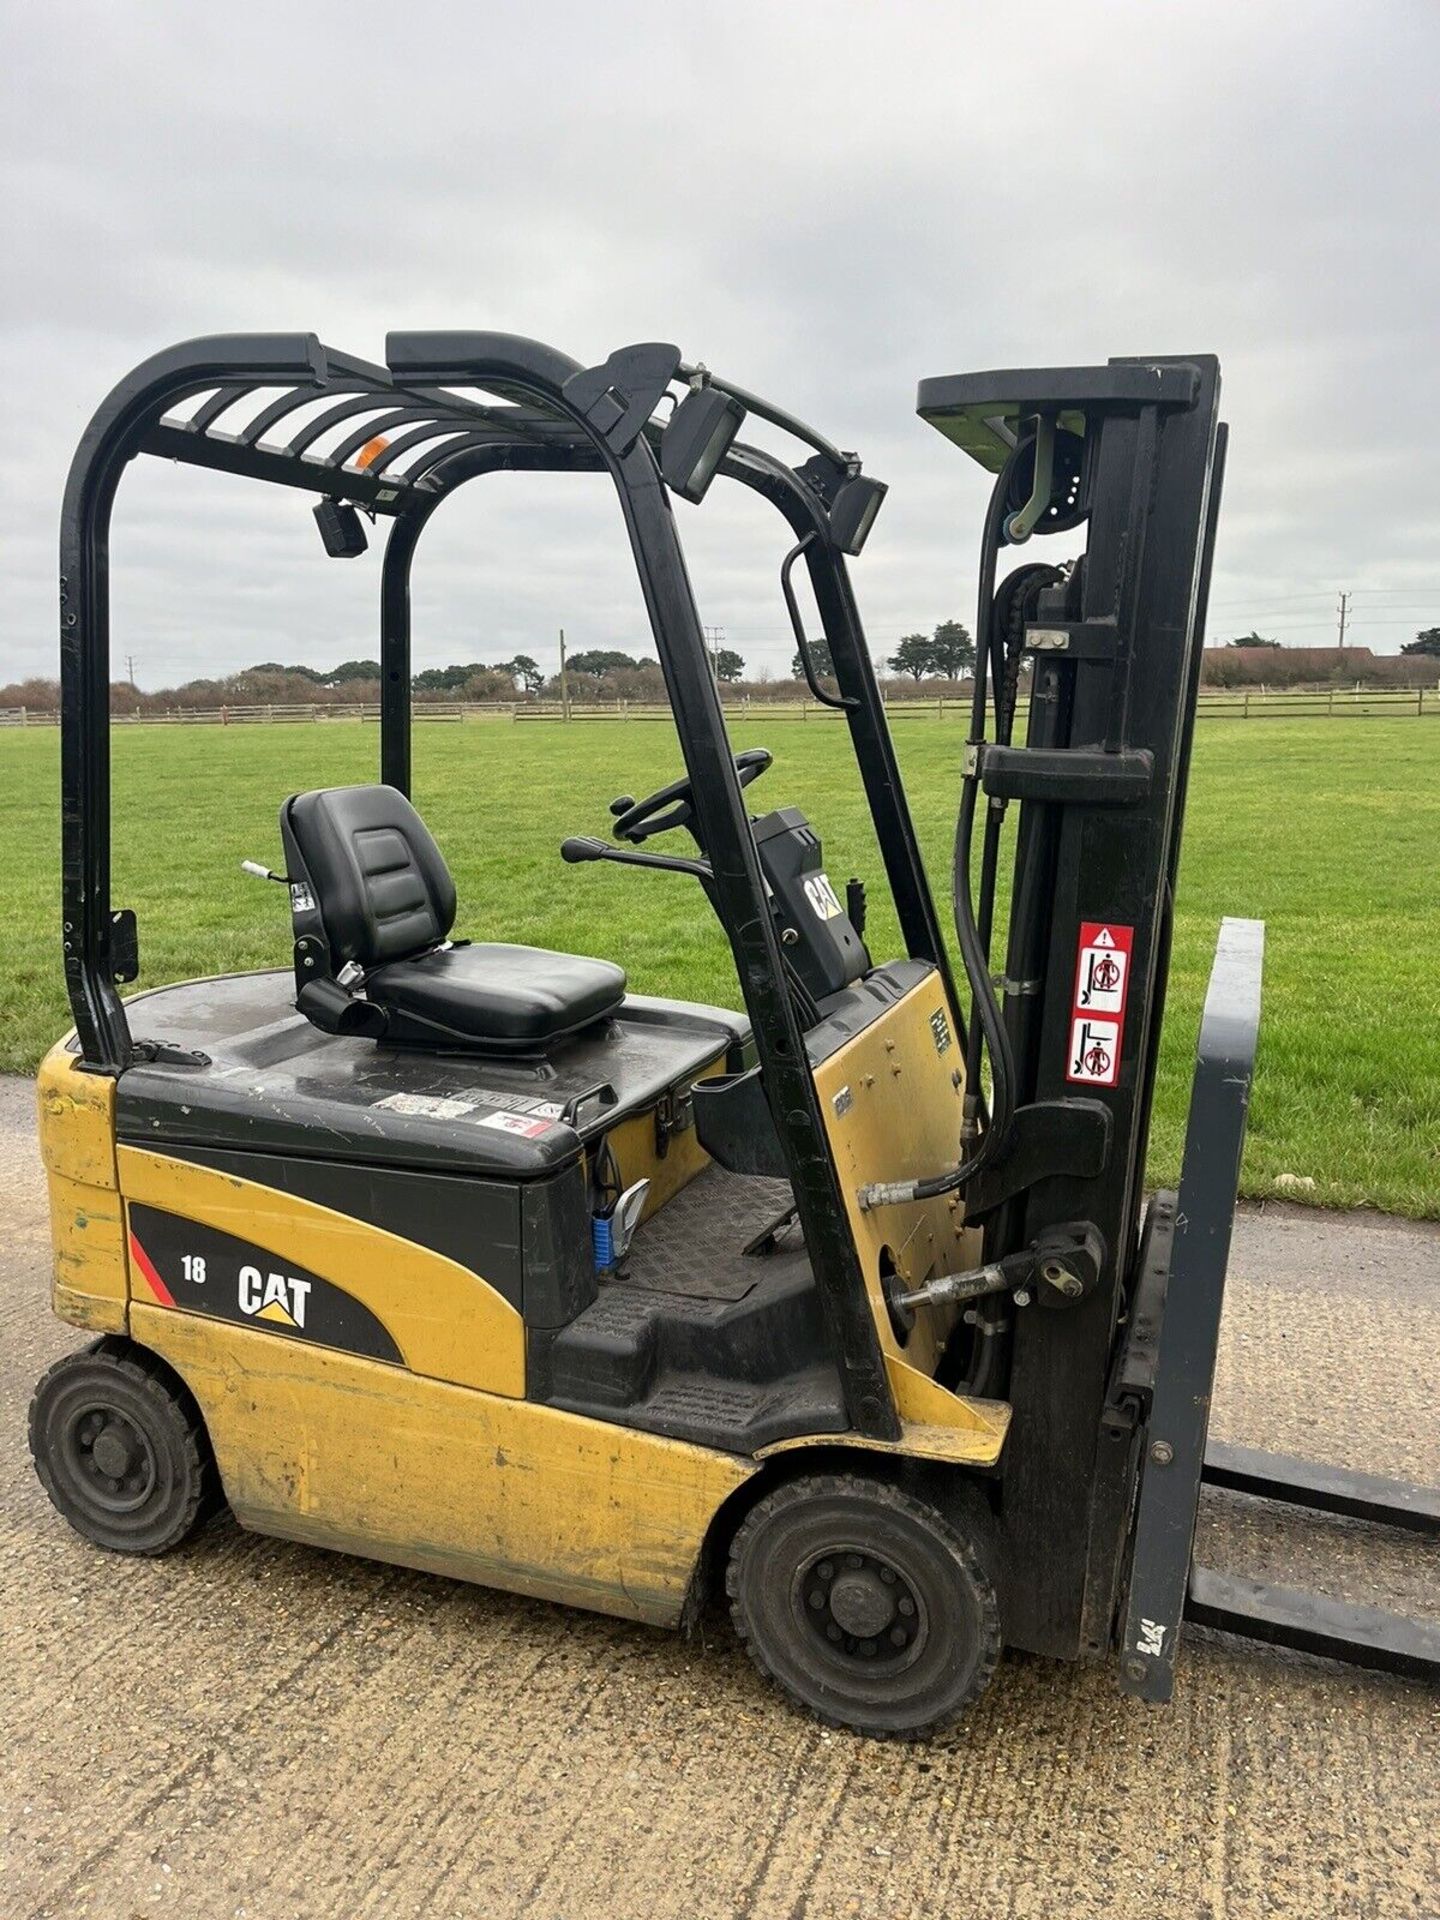 CATERPILLAR 1.8 Electric Forklift Truck Container Spec - Image 5 of 5